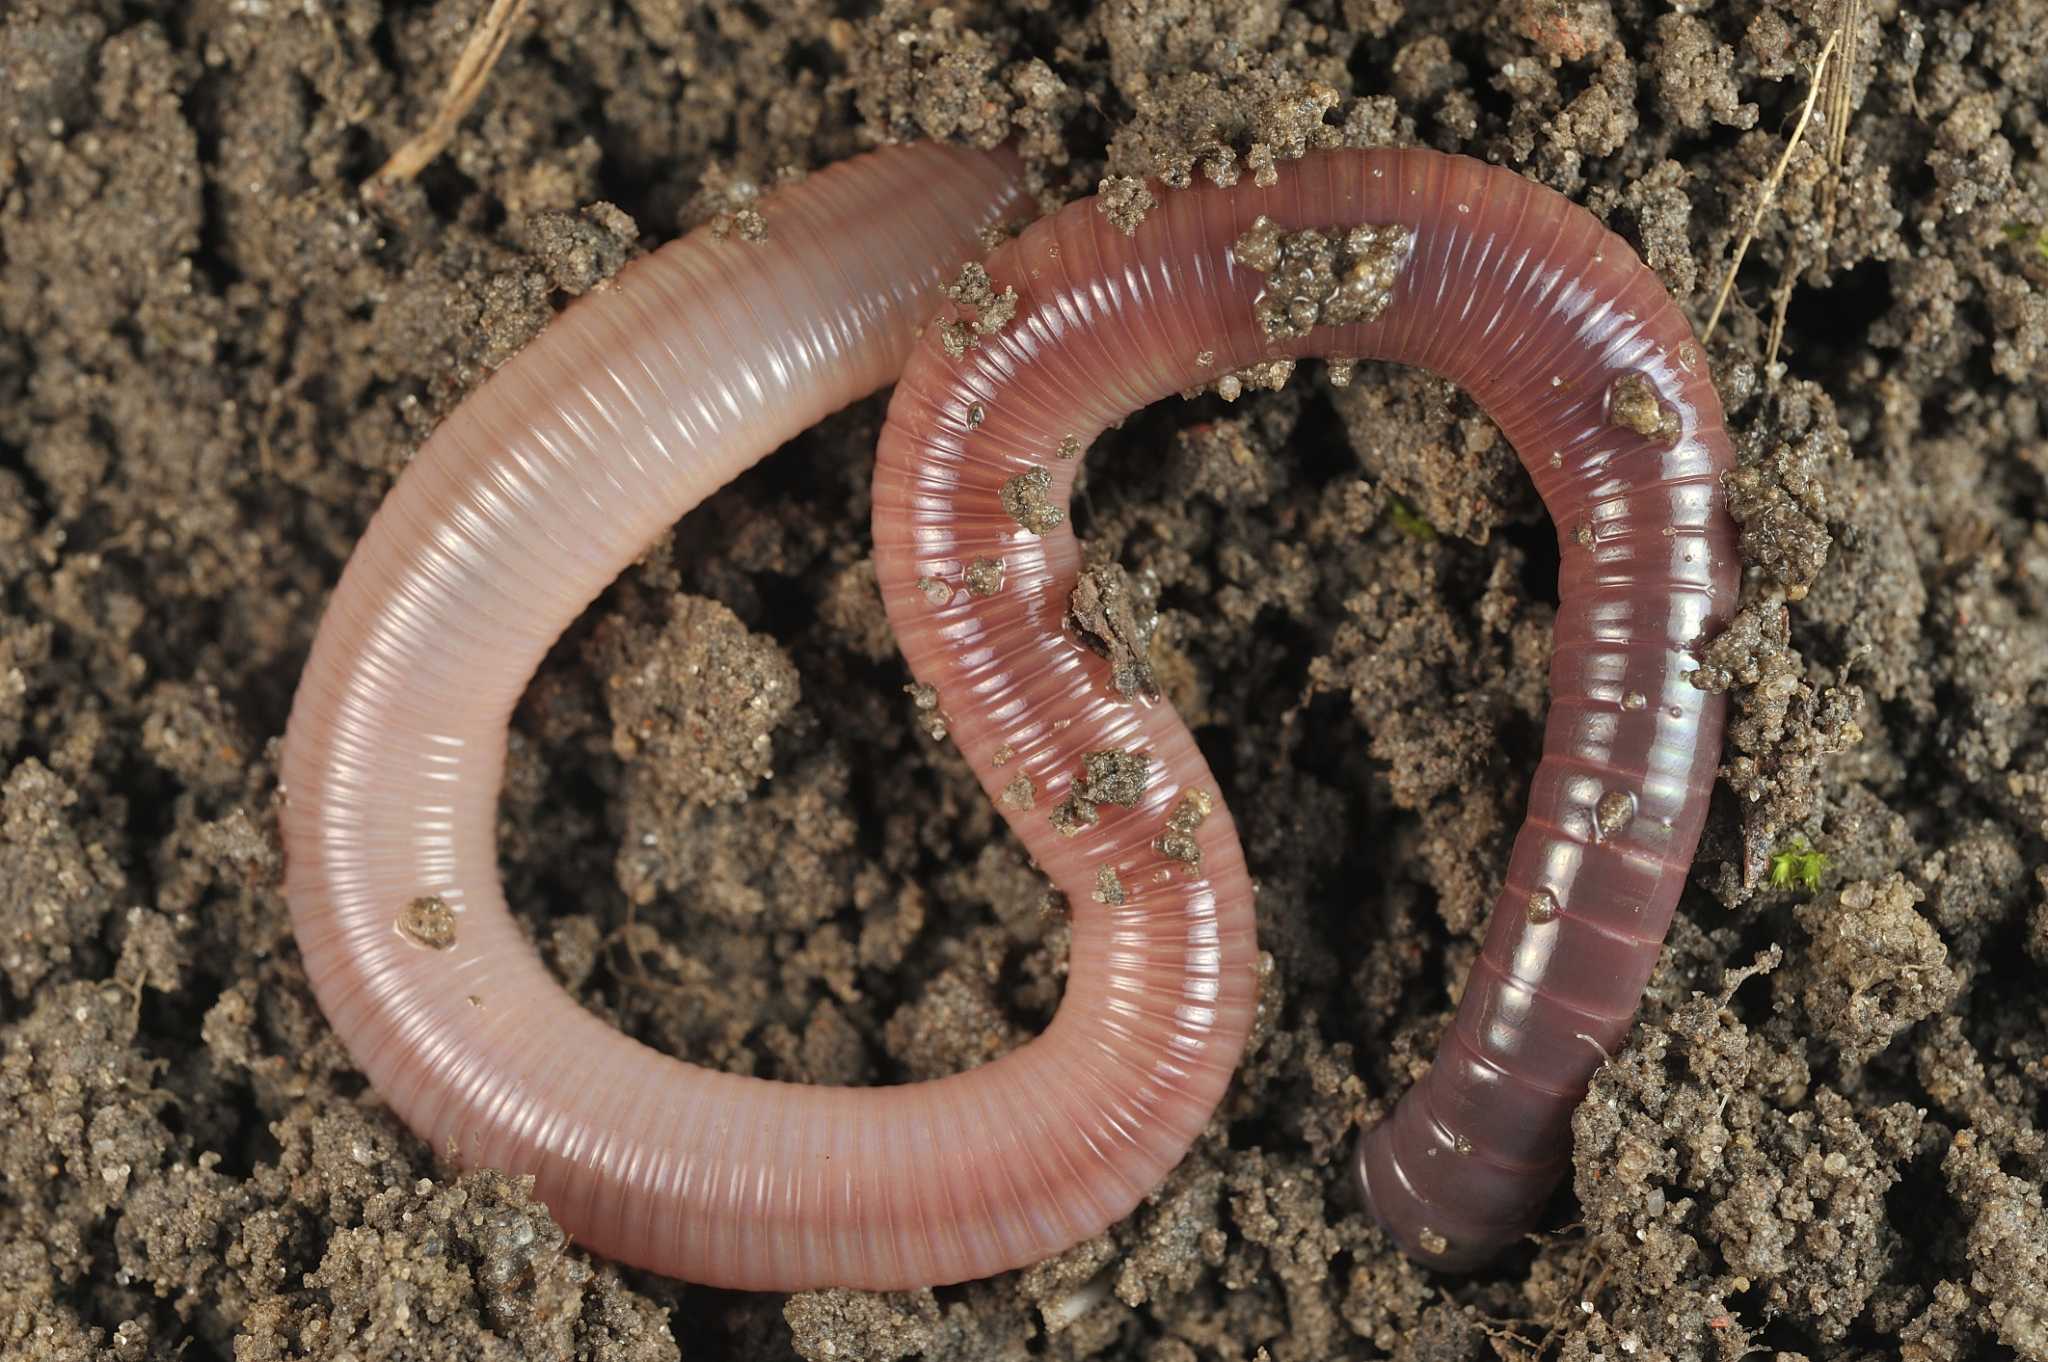 Vermicompost: Red Worms vs. European Night Crawlers